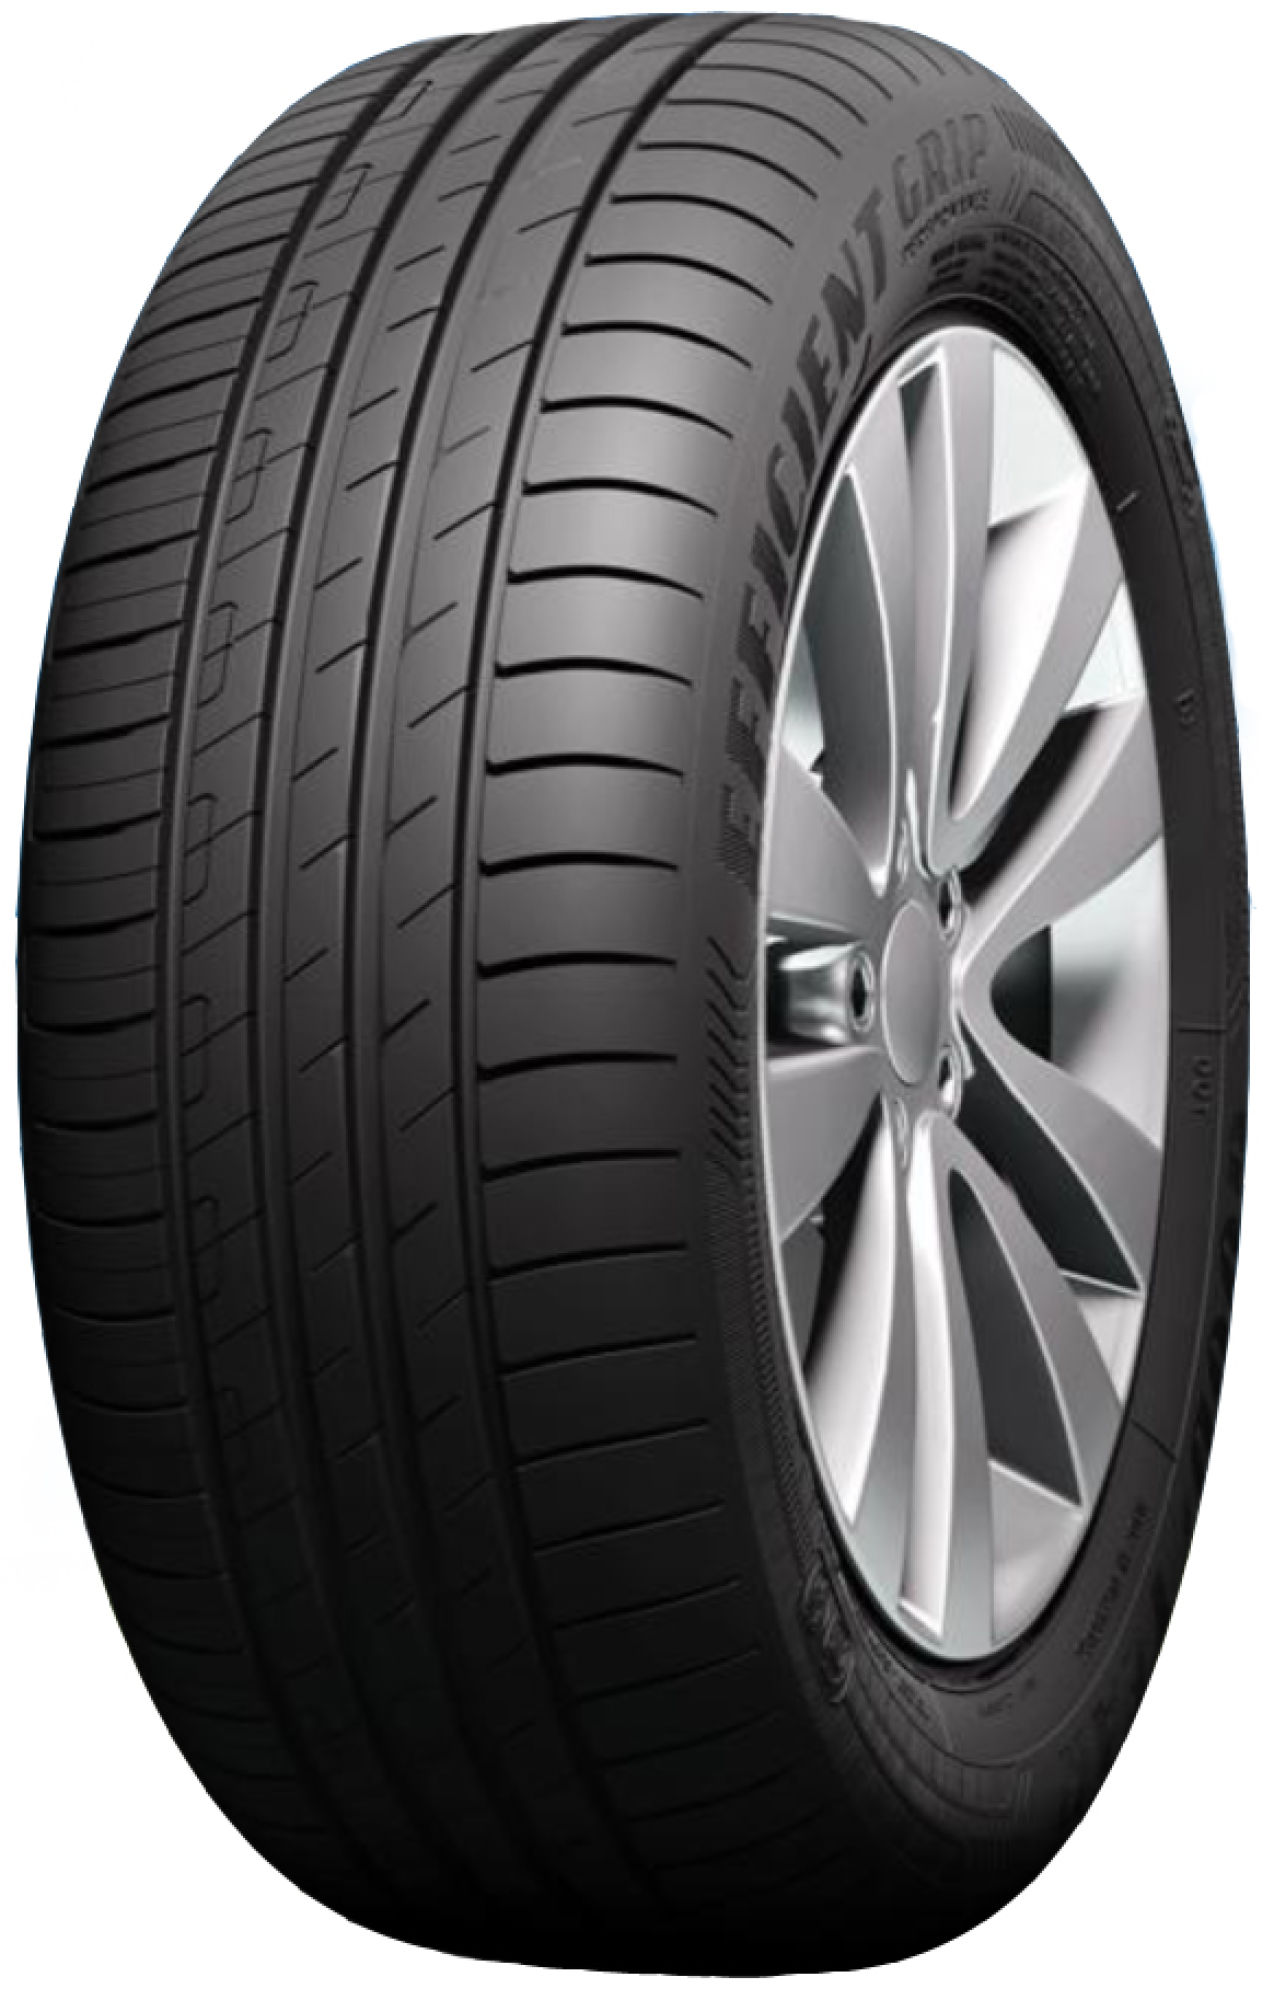 Goodyear EfficientGrip Reviews - Tests and Performance Tire